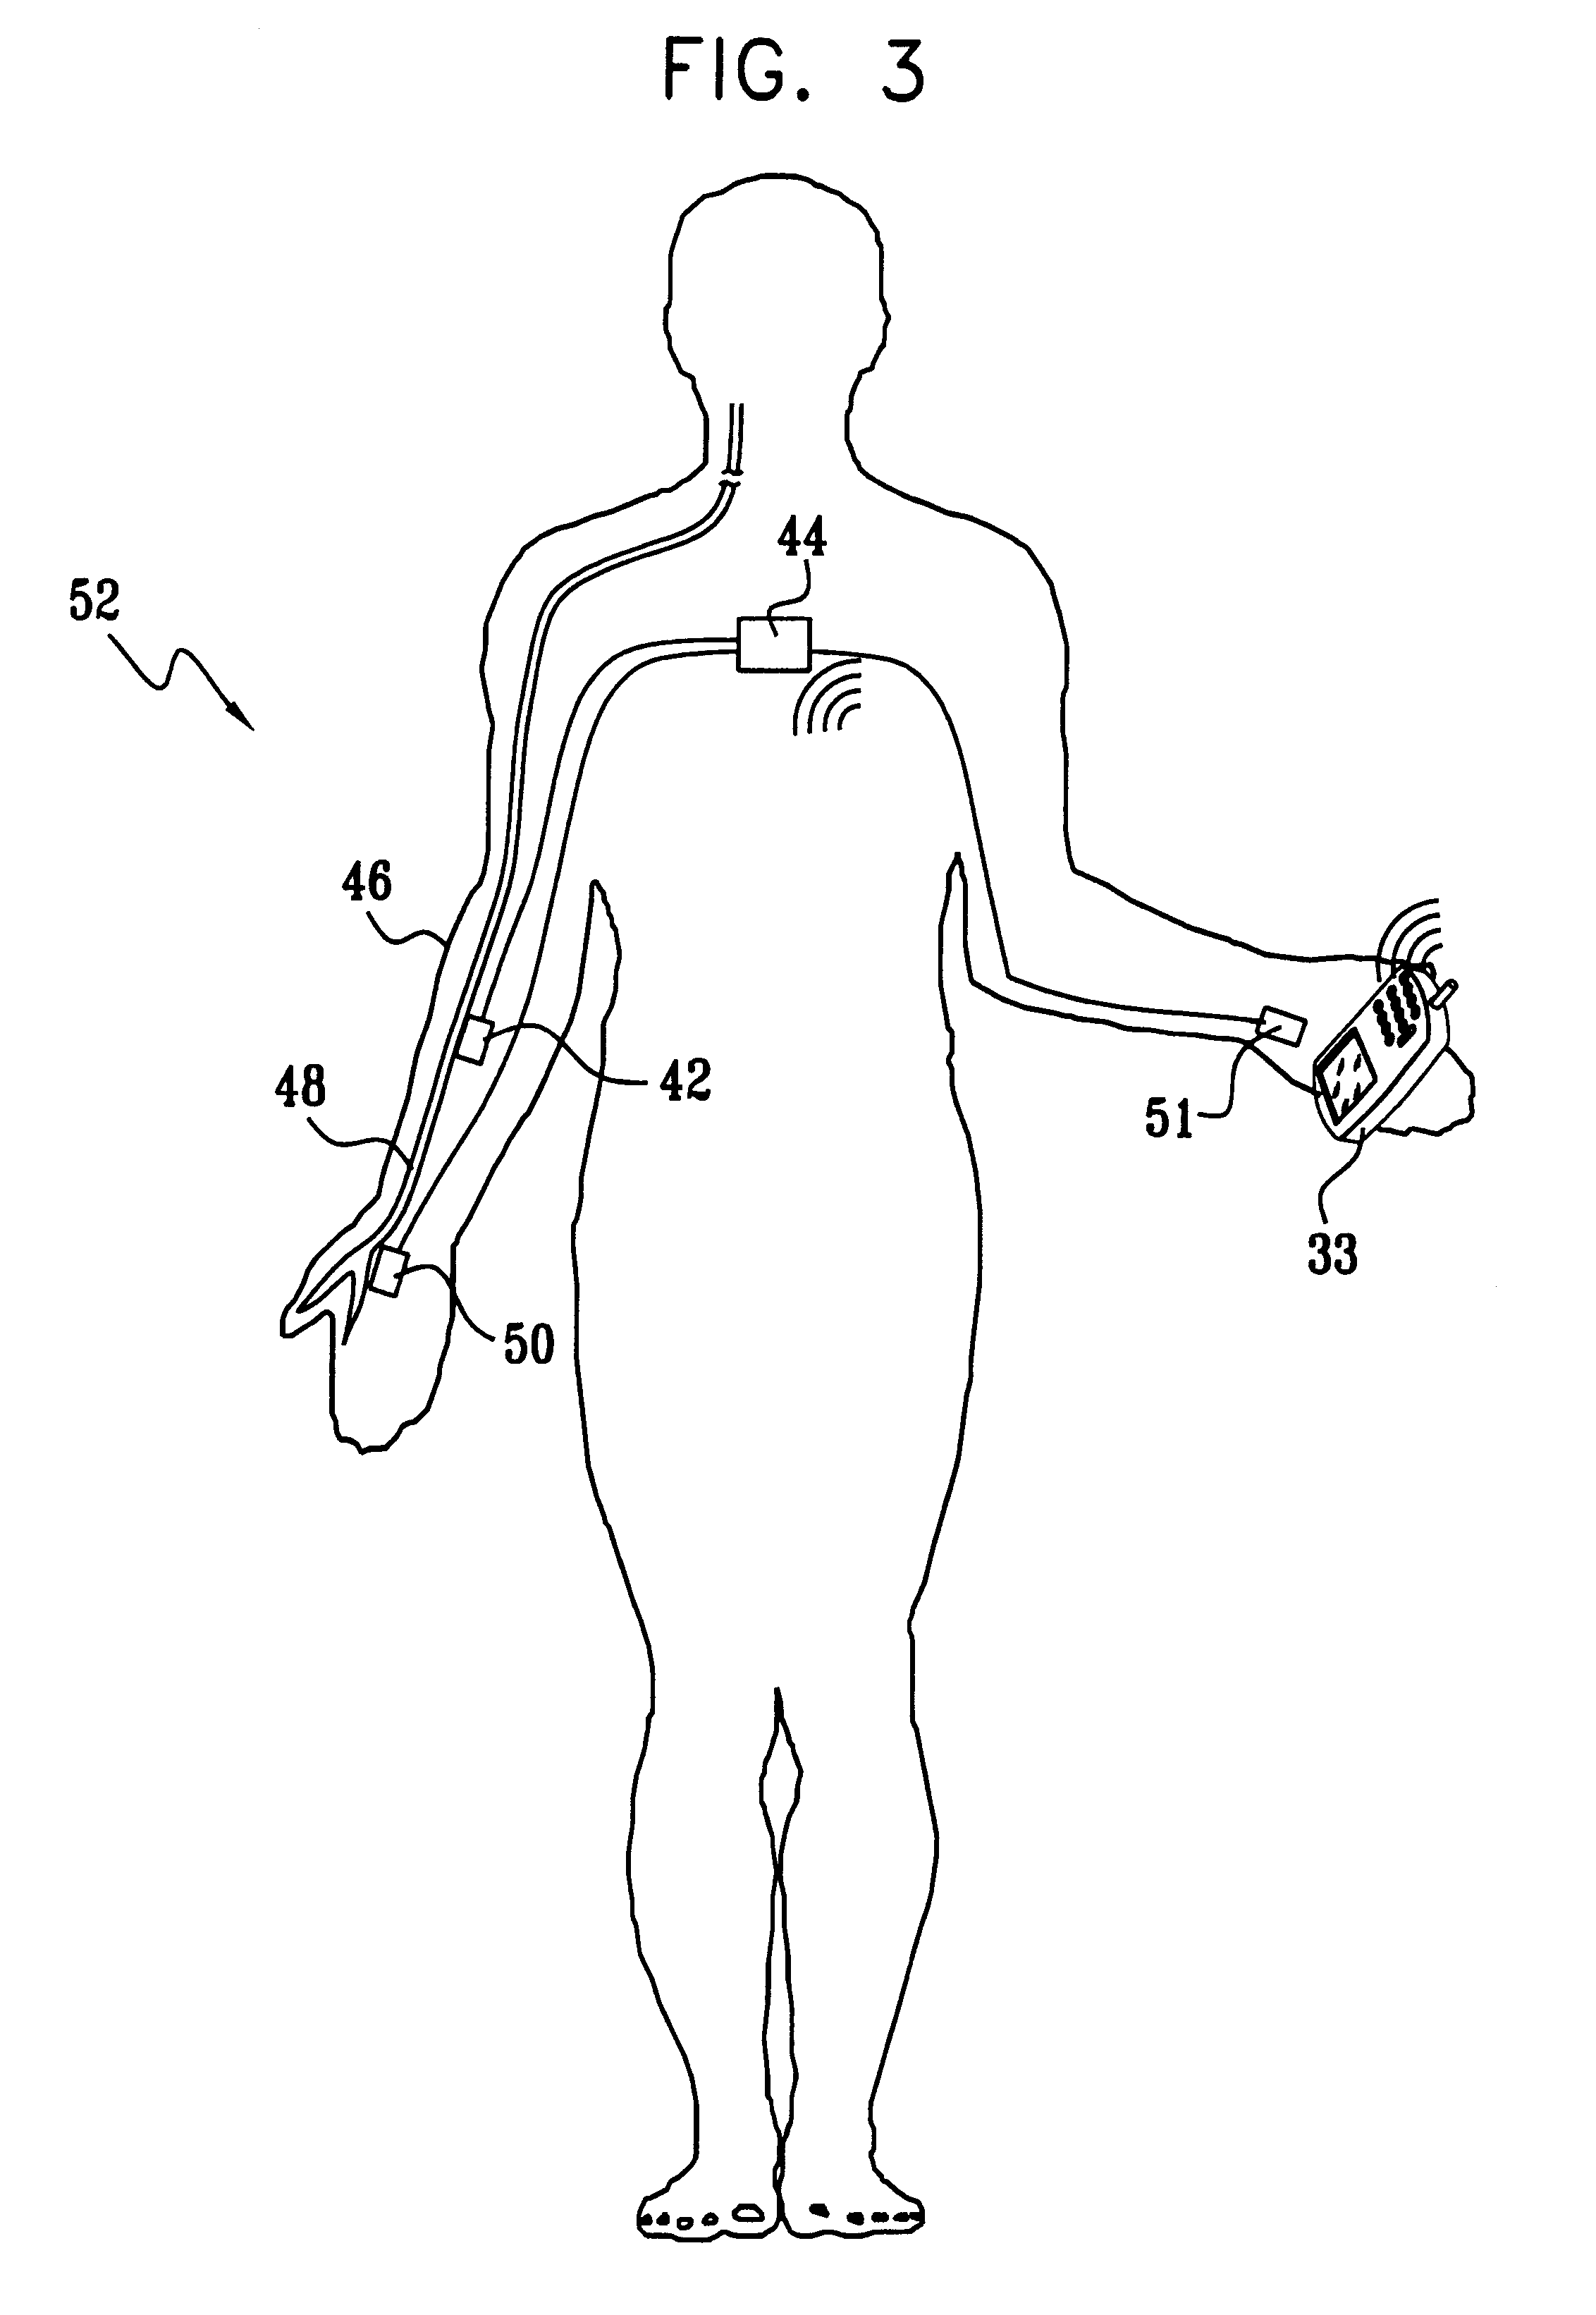 Actuation and control of limbs through motor nerve stimulation